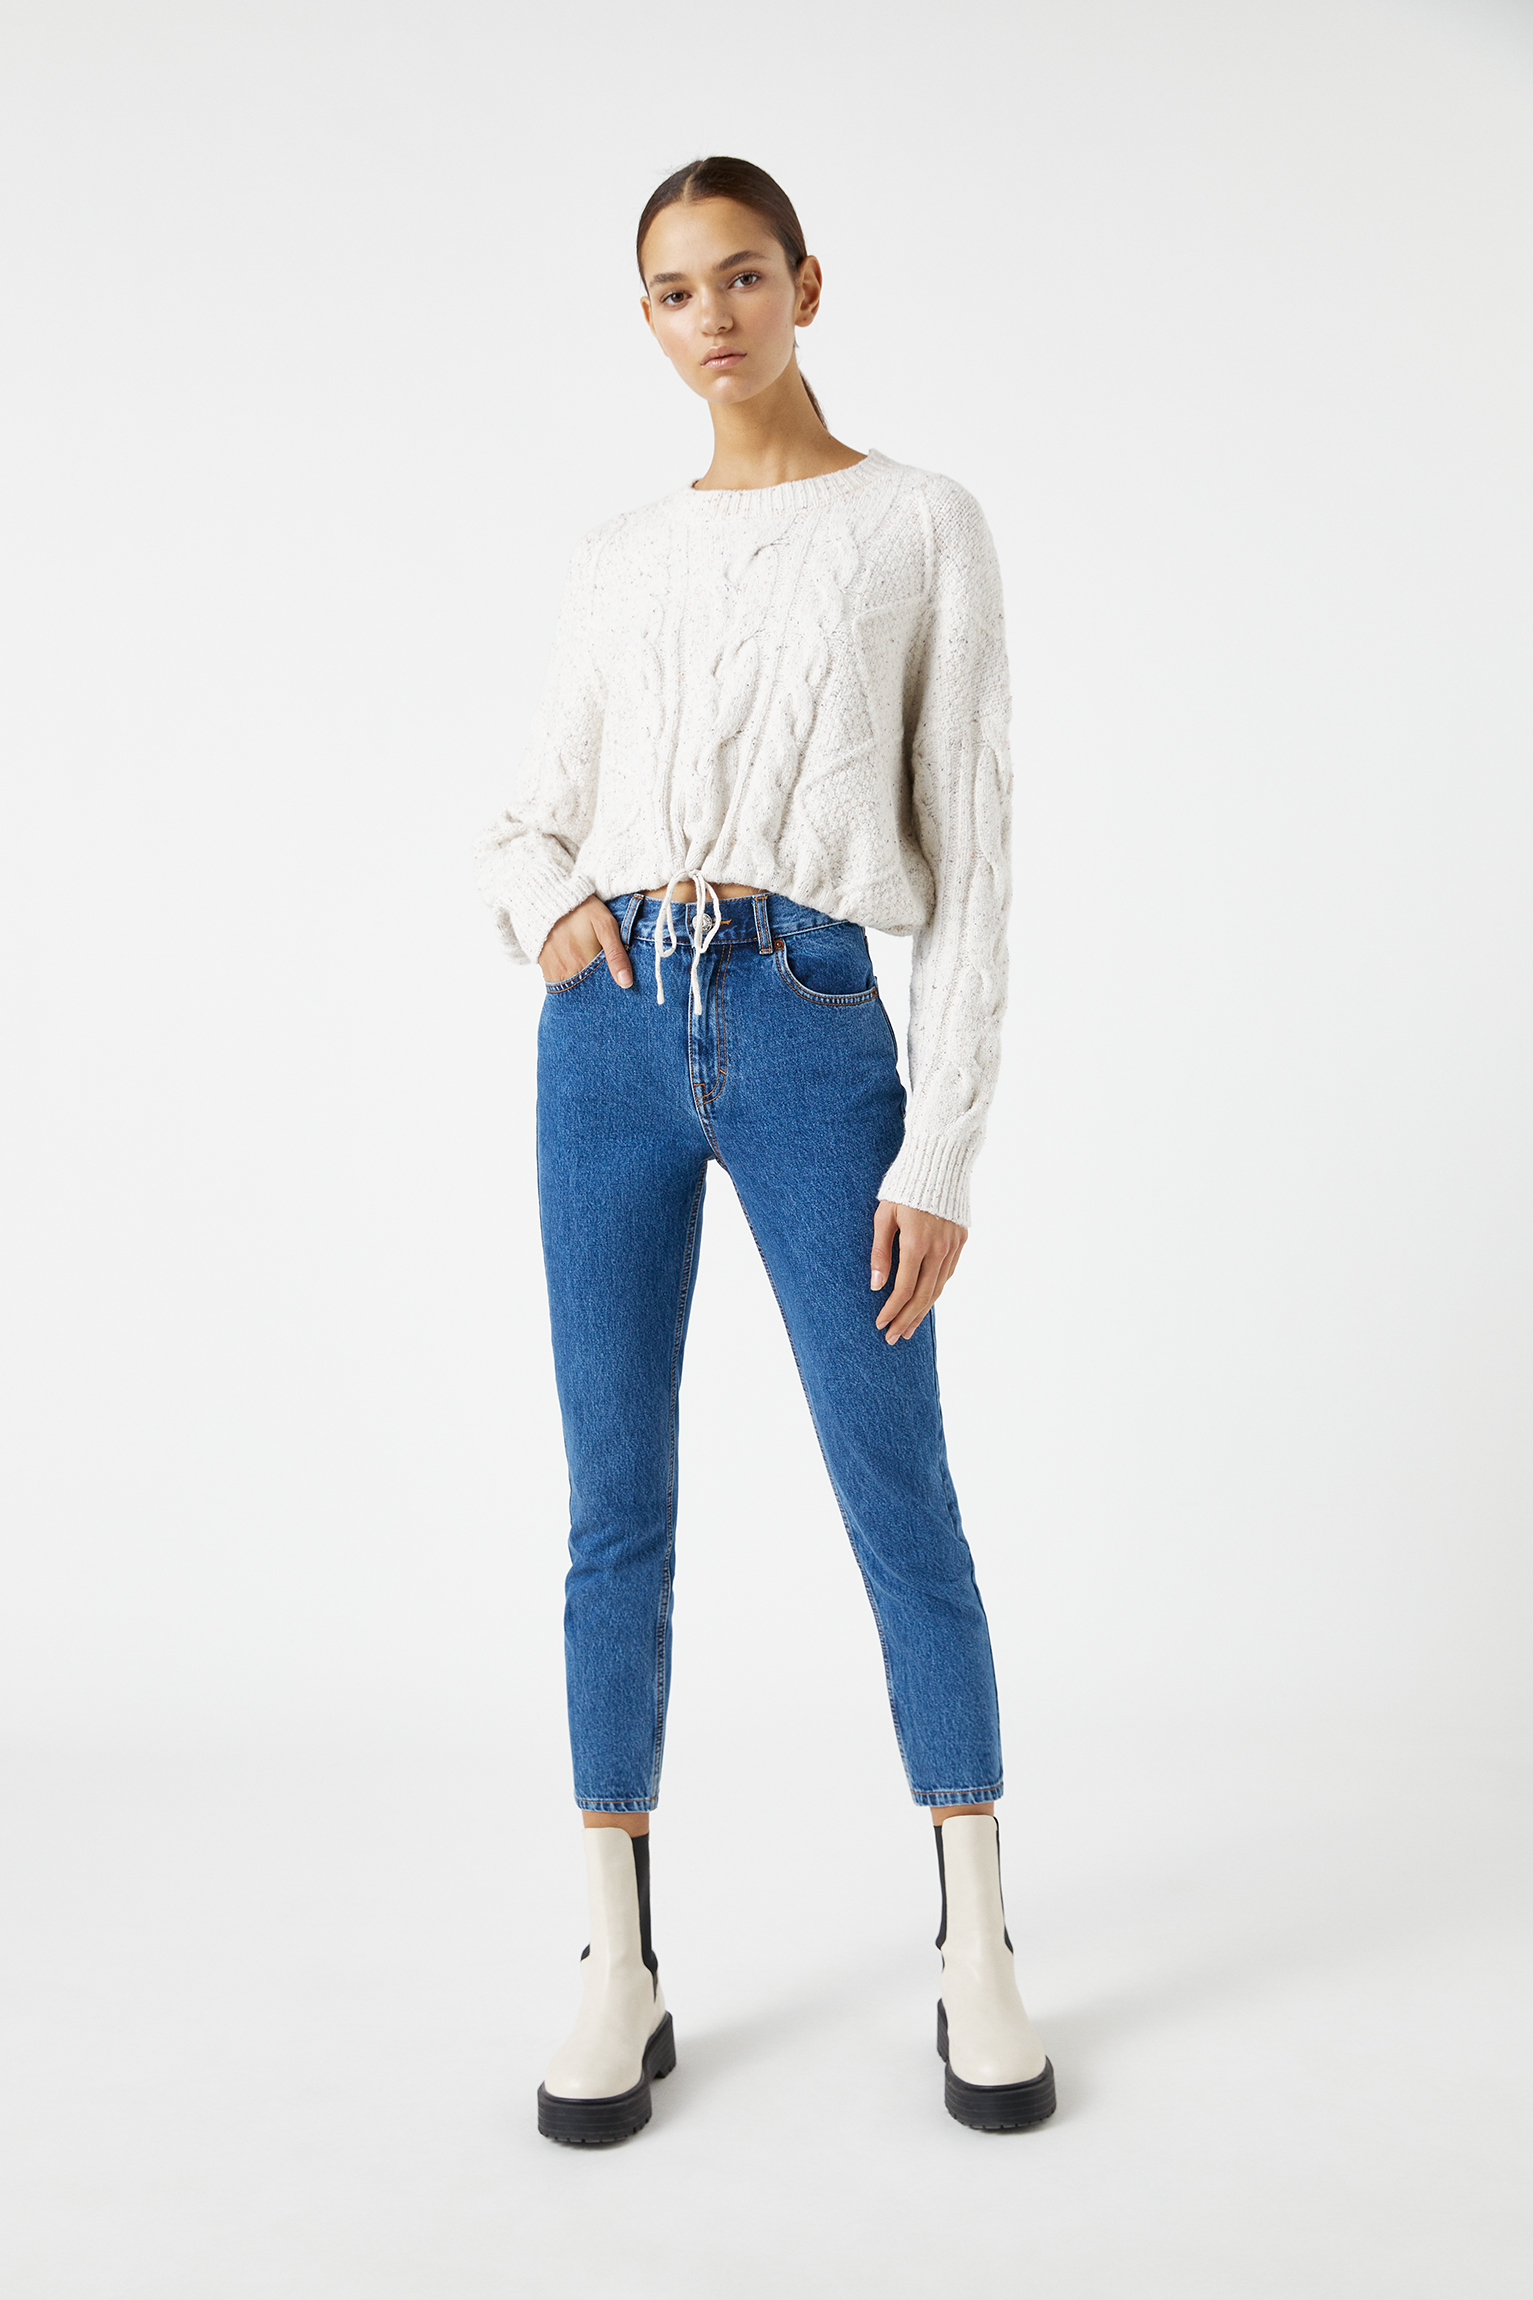 pull and bear mom fit jean